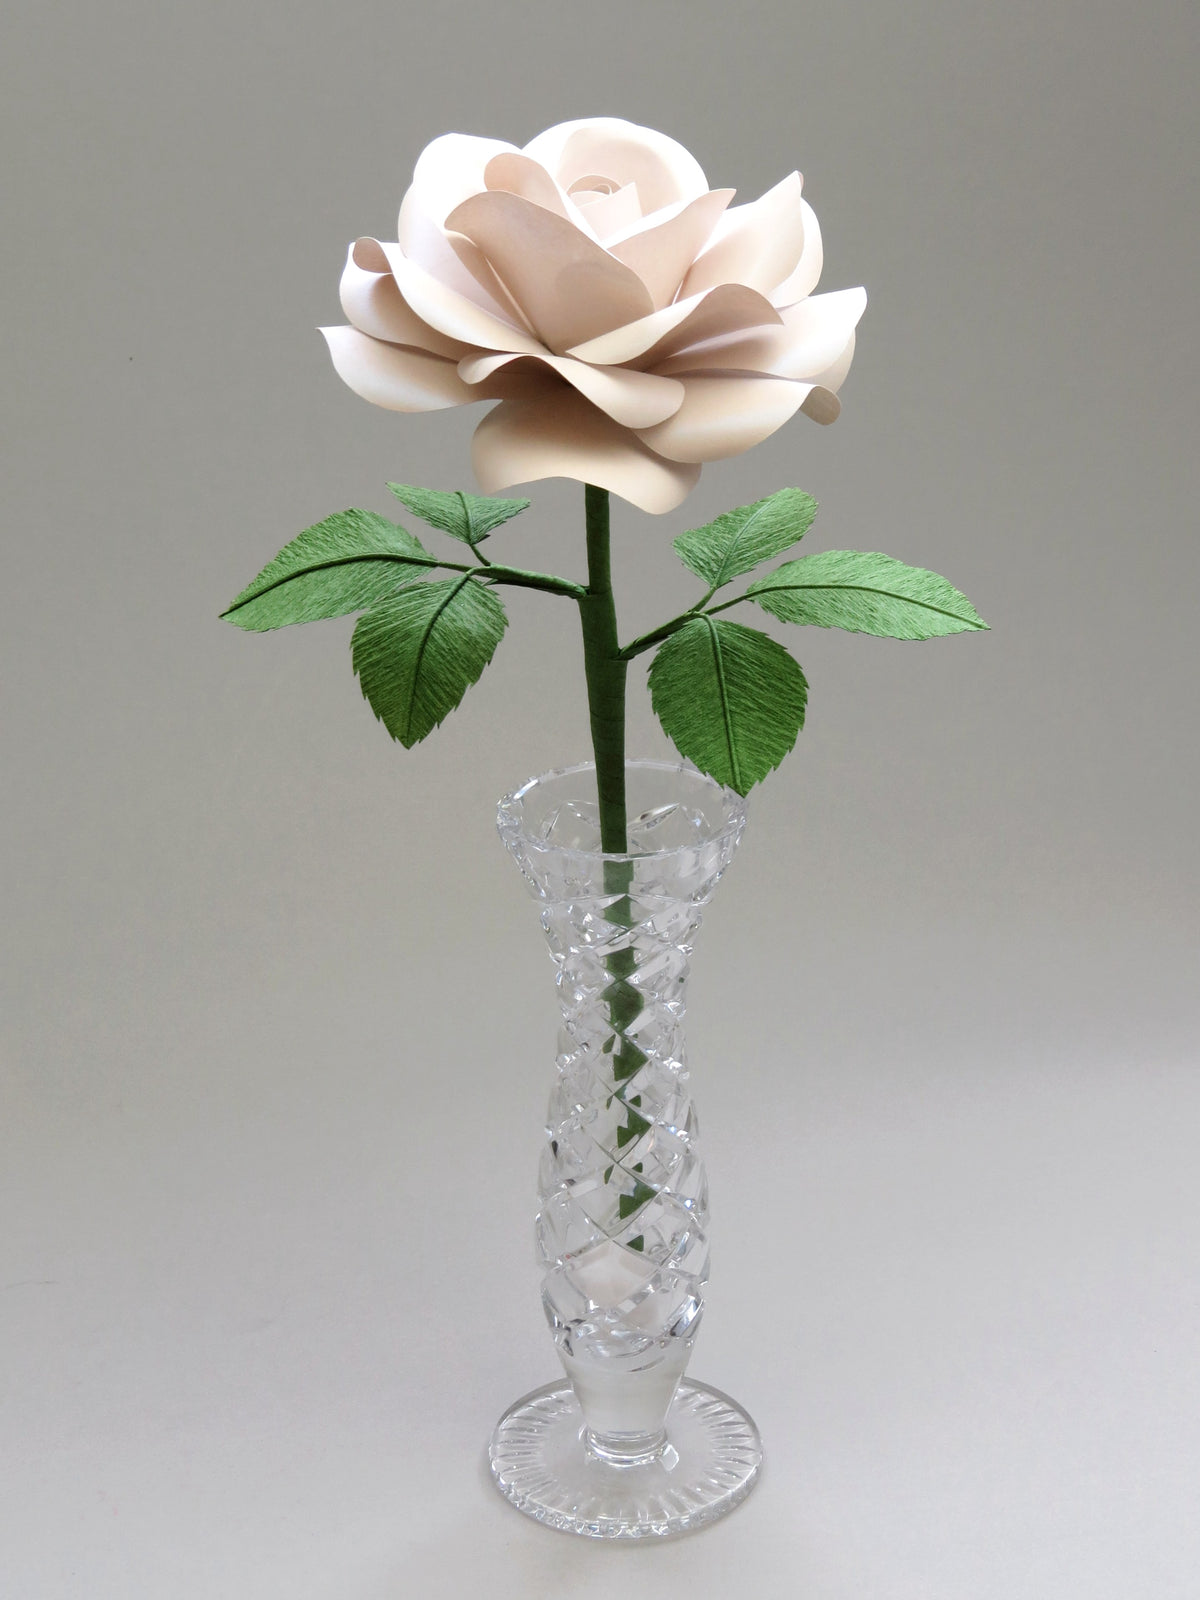 Pearl paper rose with six ivy green crepe paper leaves standing in a narrow glass vase set against a light grey background